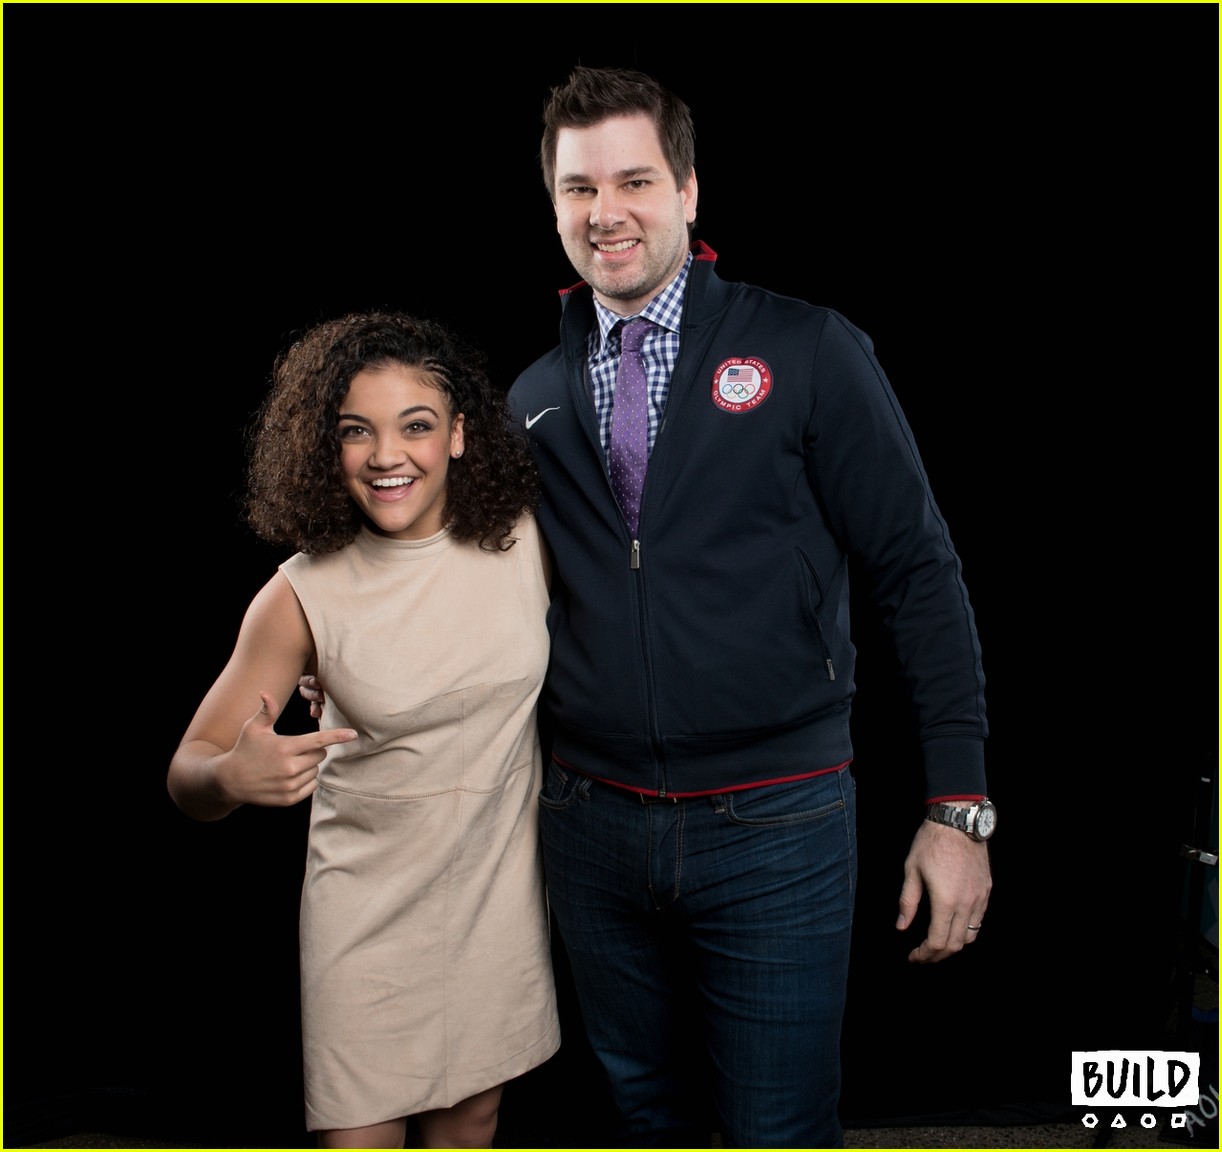 laurie hernandez aol build nyc 14